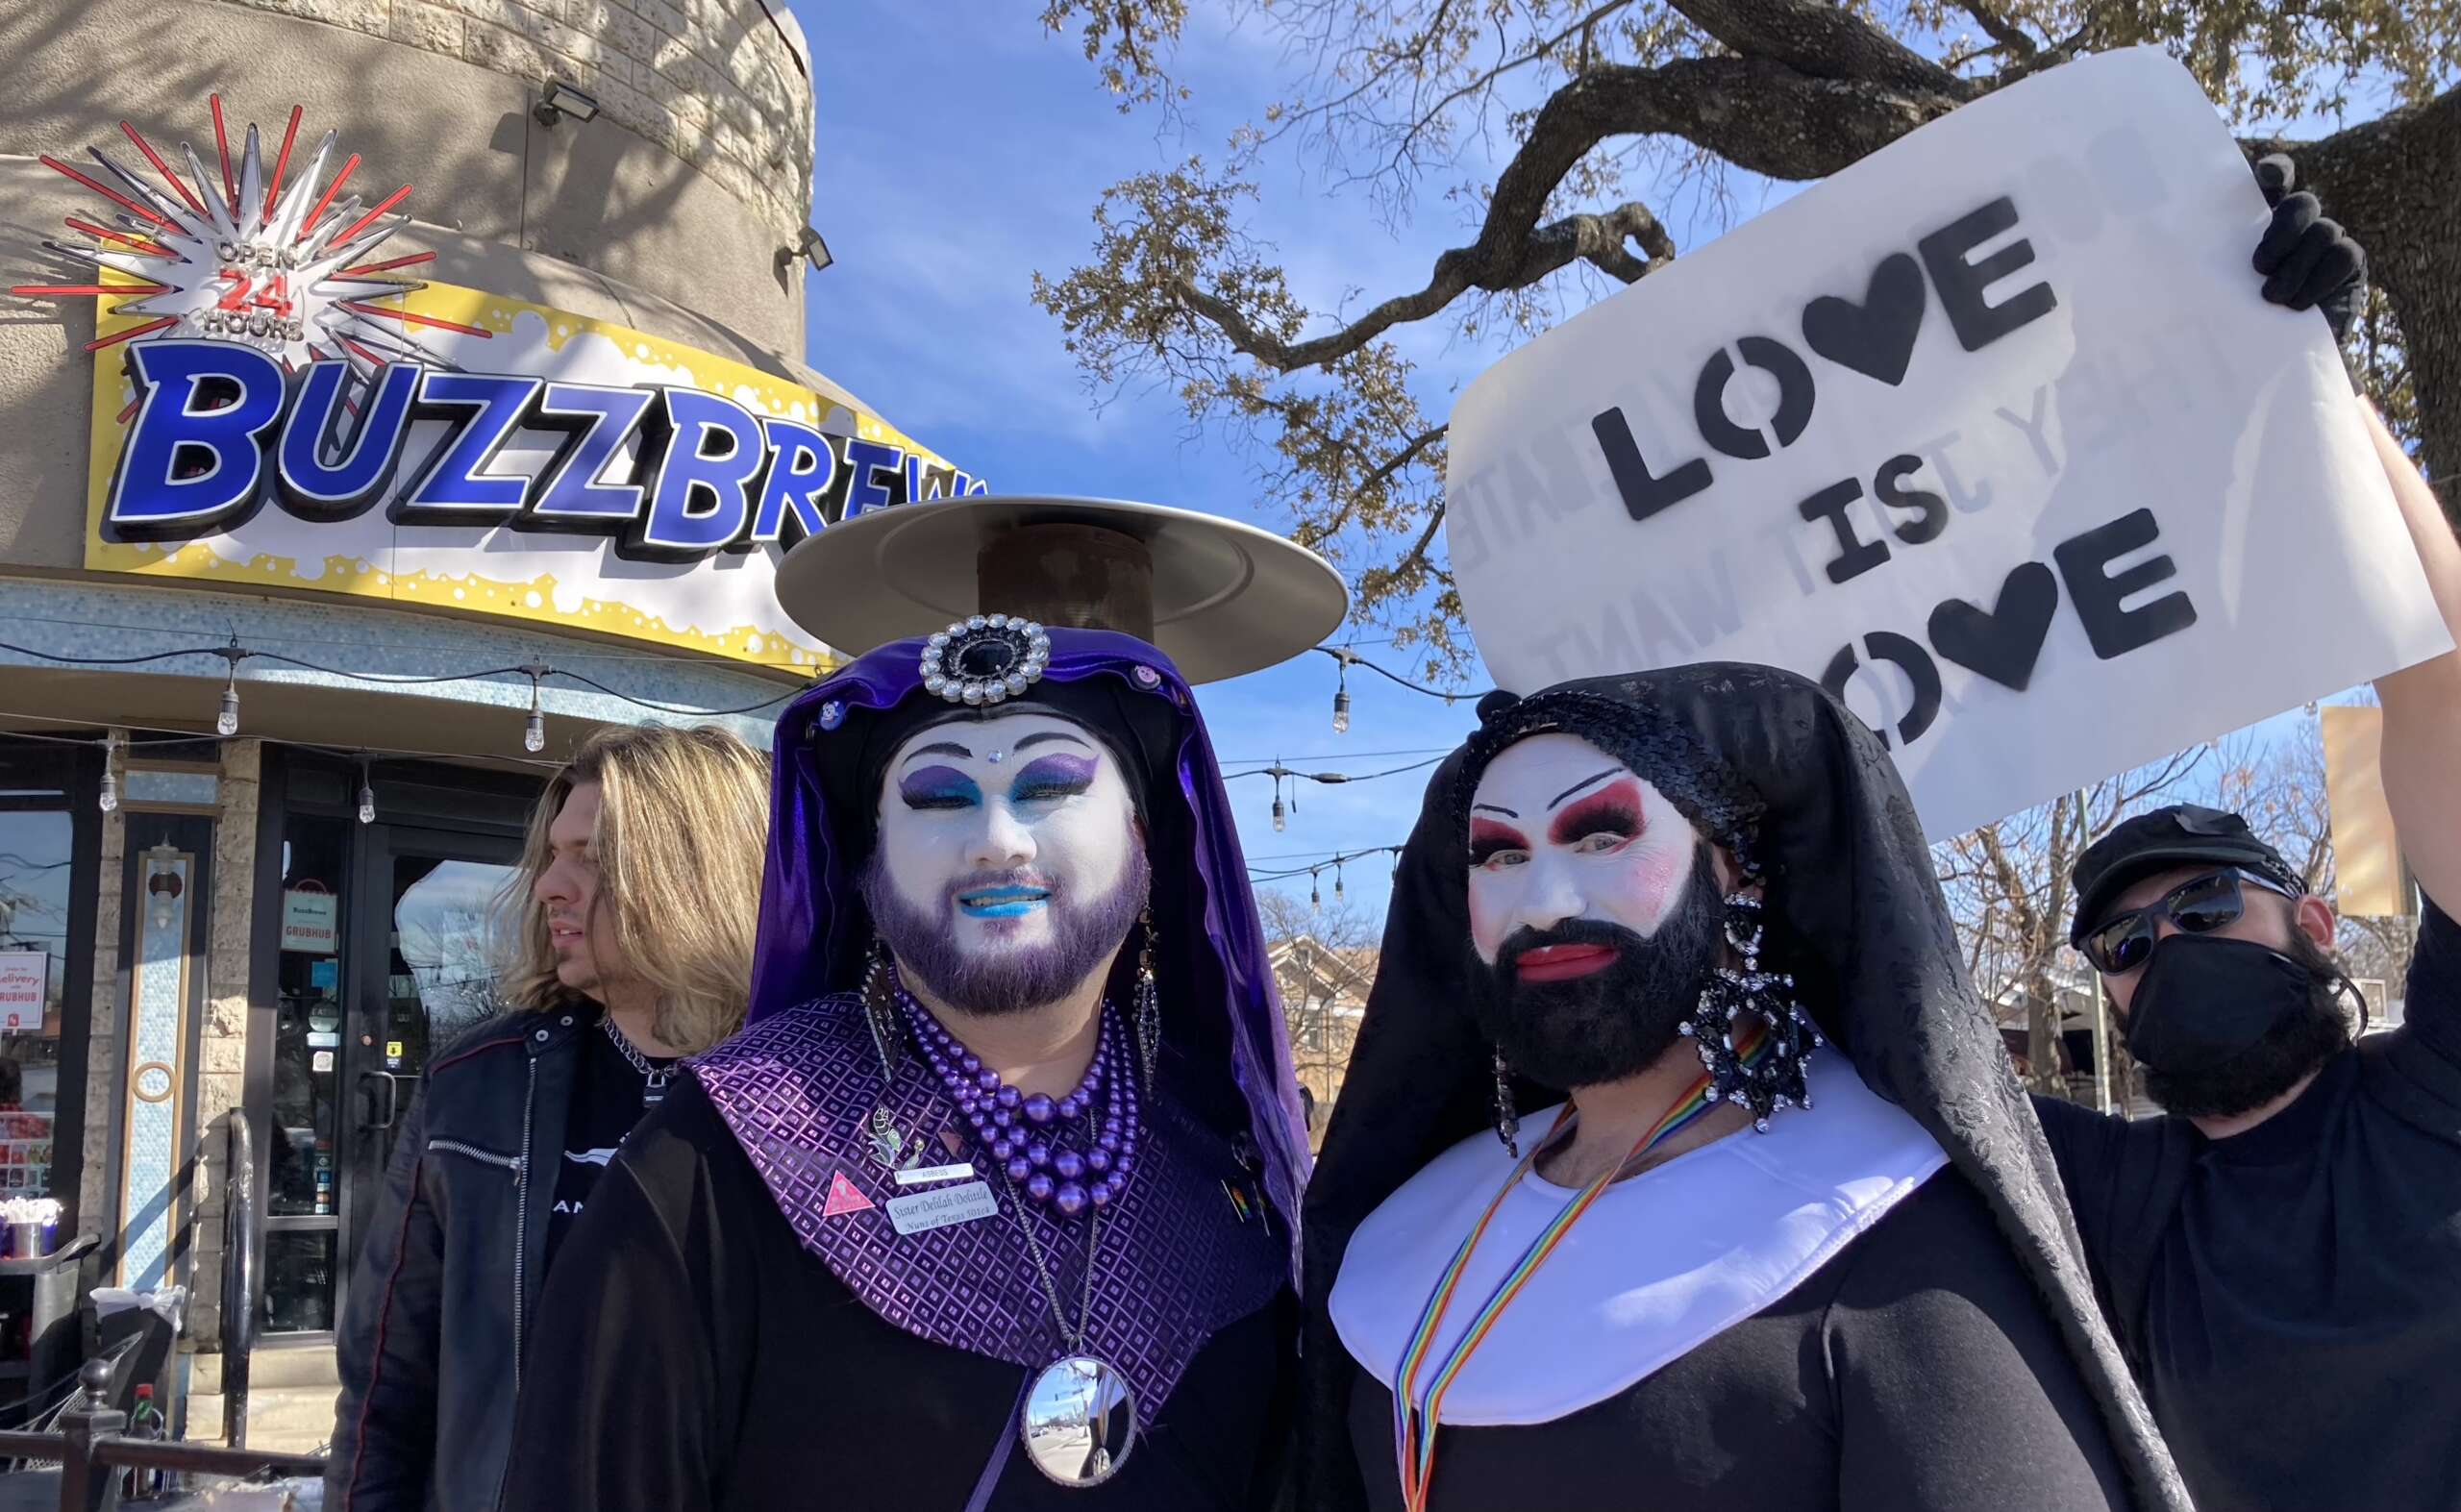 Religious groups protest Sisters of Perpetual Indulgence hours